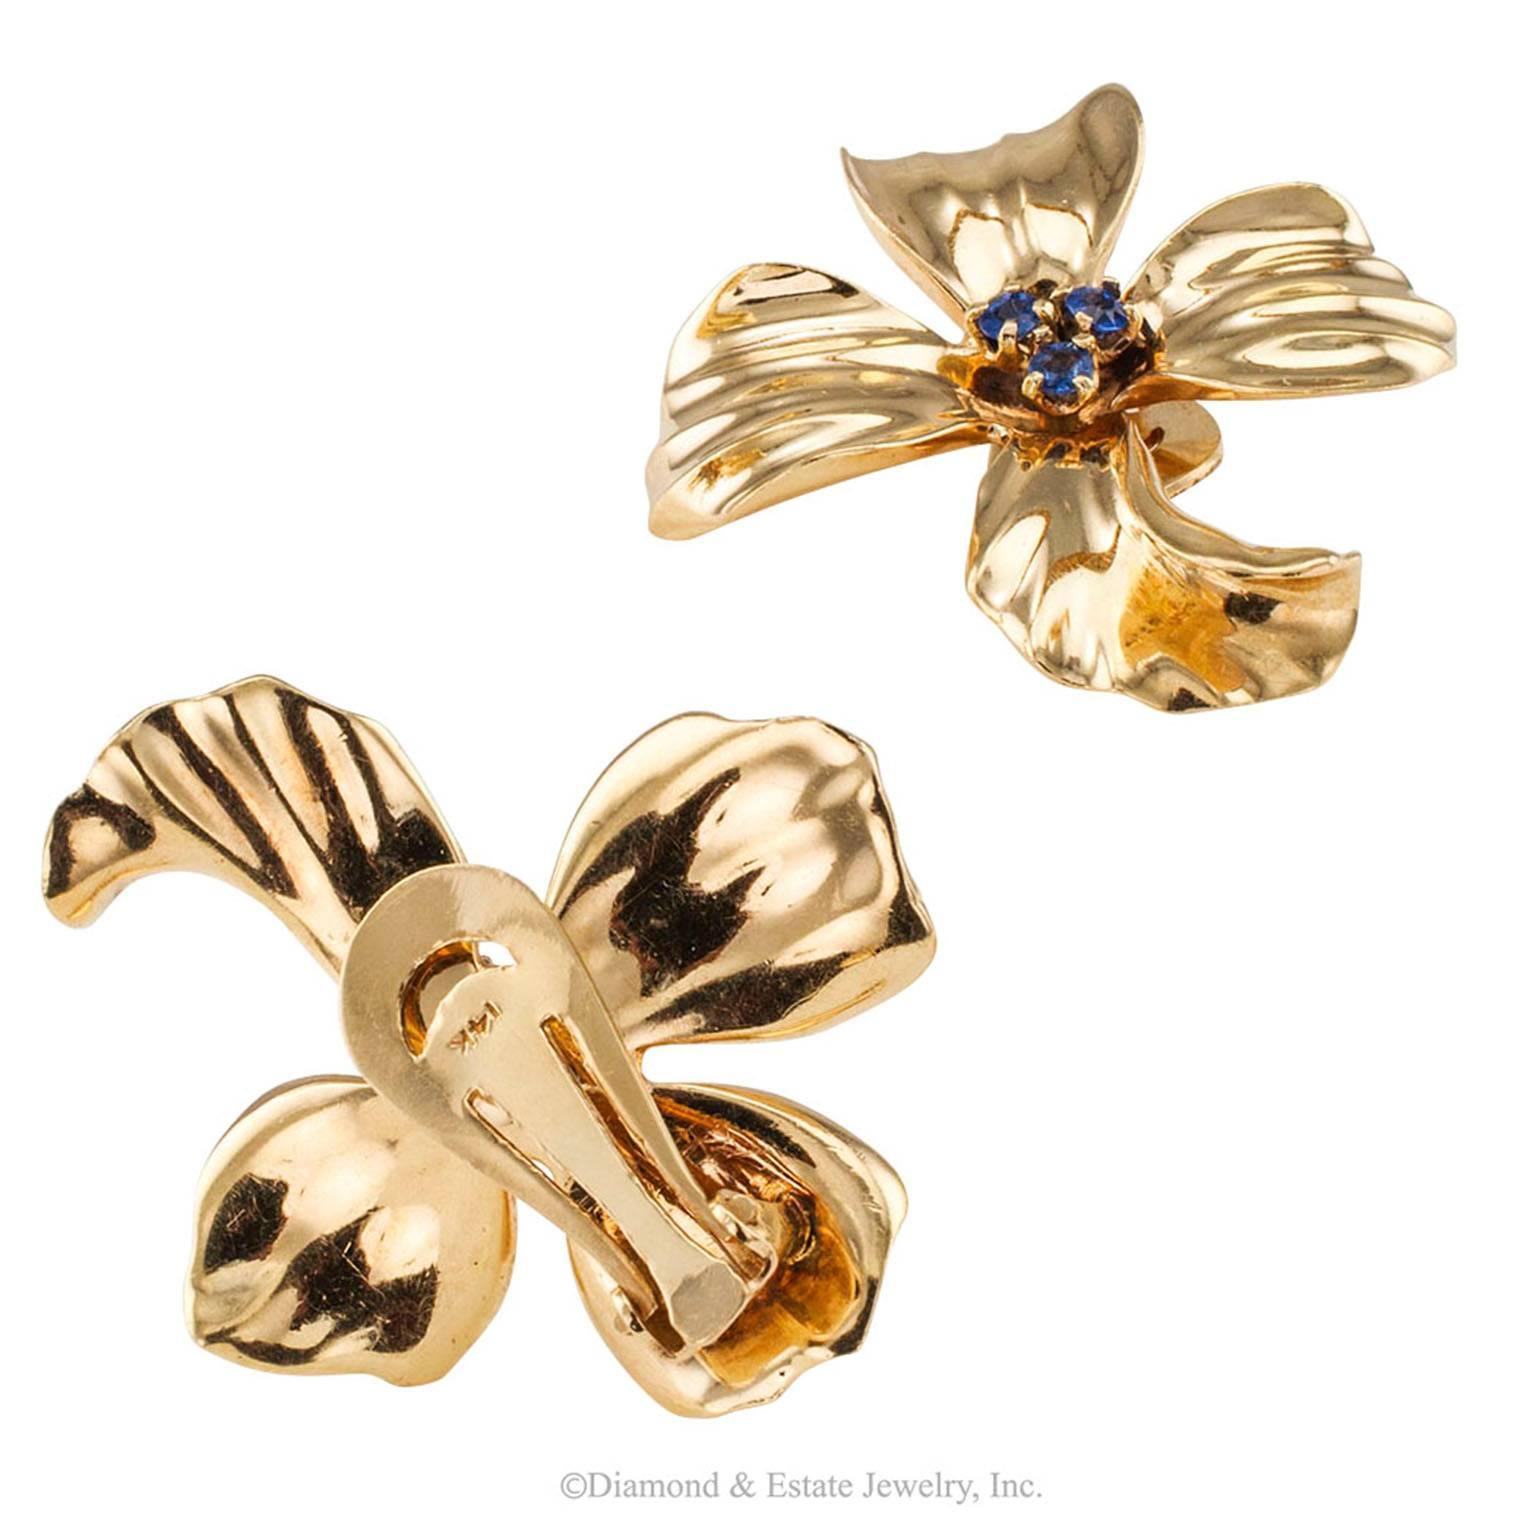 1950s Dogwood Flower Sapphire Gold Ear Clips

Dogwood flower ear clips set with sapphires crafted in 14-karat gold circa 1950.  Left and right matching designs comprising  a  pair of dogwood flowers each centering three prong-set, round blue